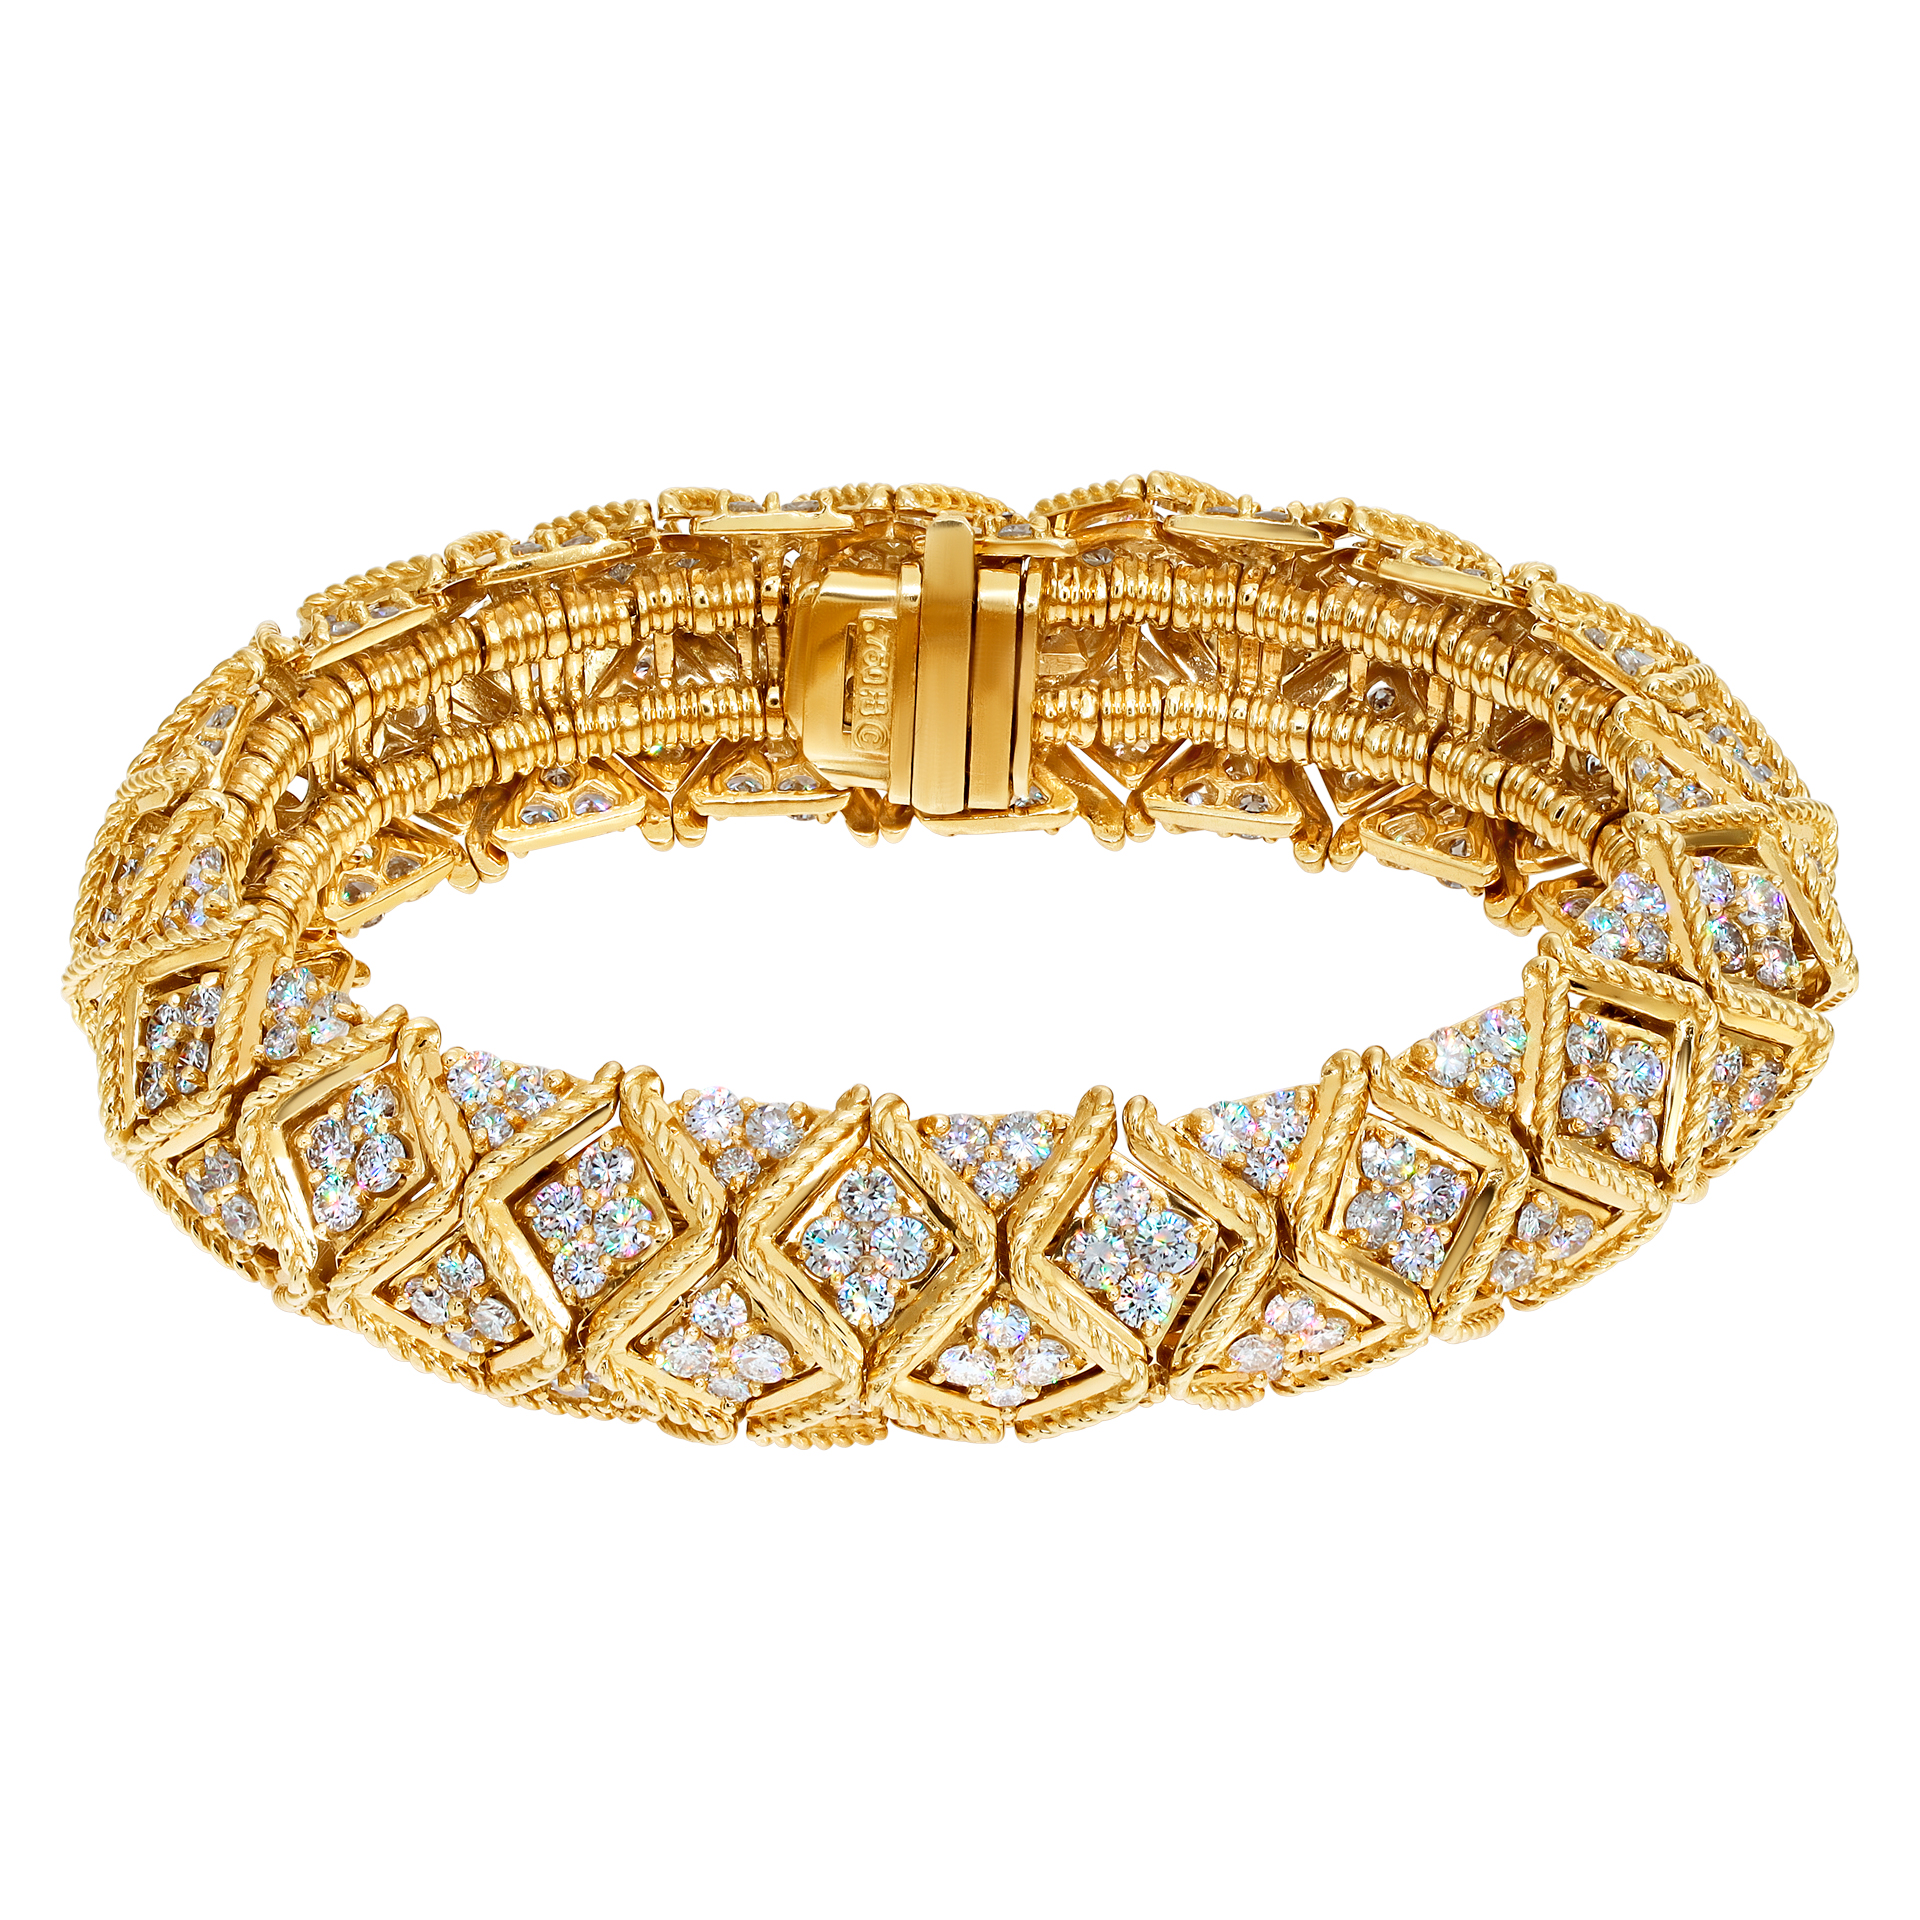 Signed Hammerman Brothers New-York, diamonds bracelet in 18k yelllow gold.  Round brilliant cut diamonds total approx. weight 20.00